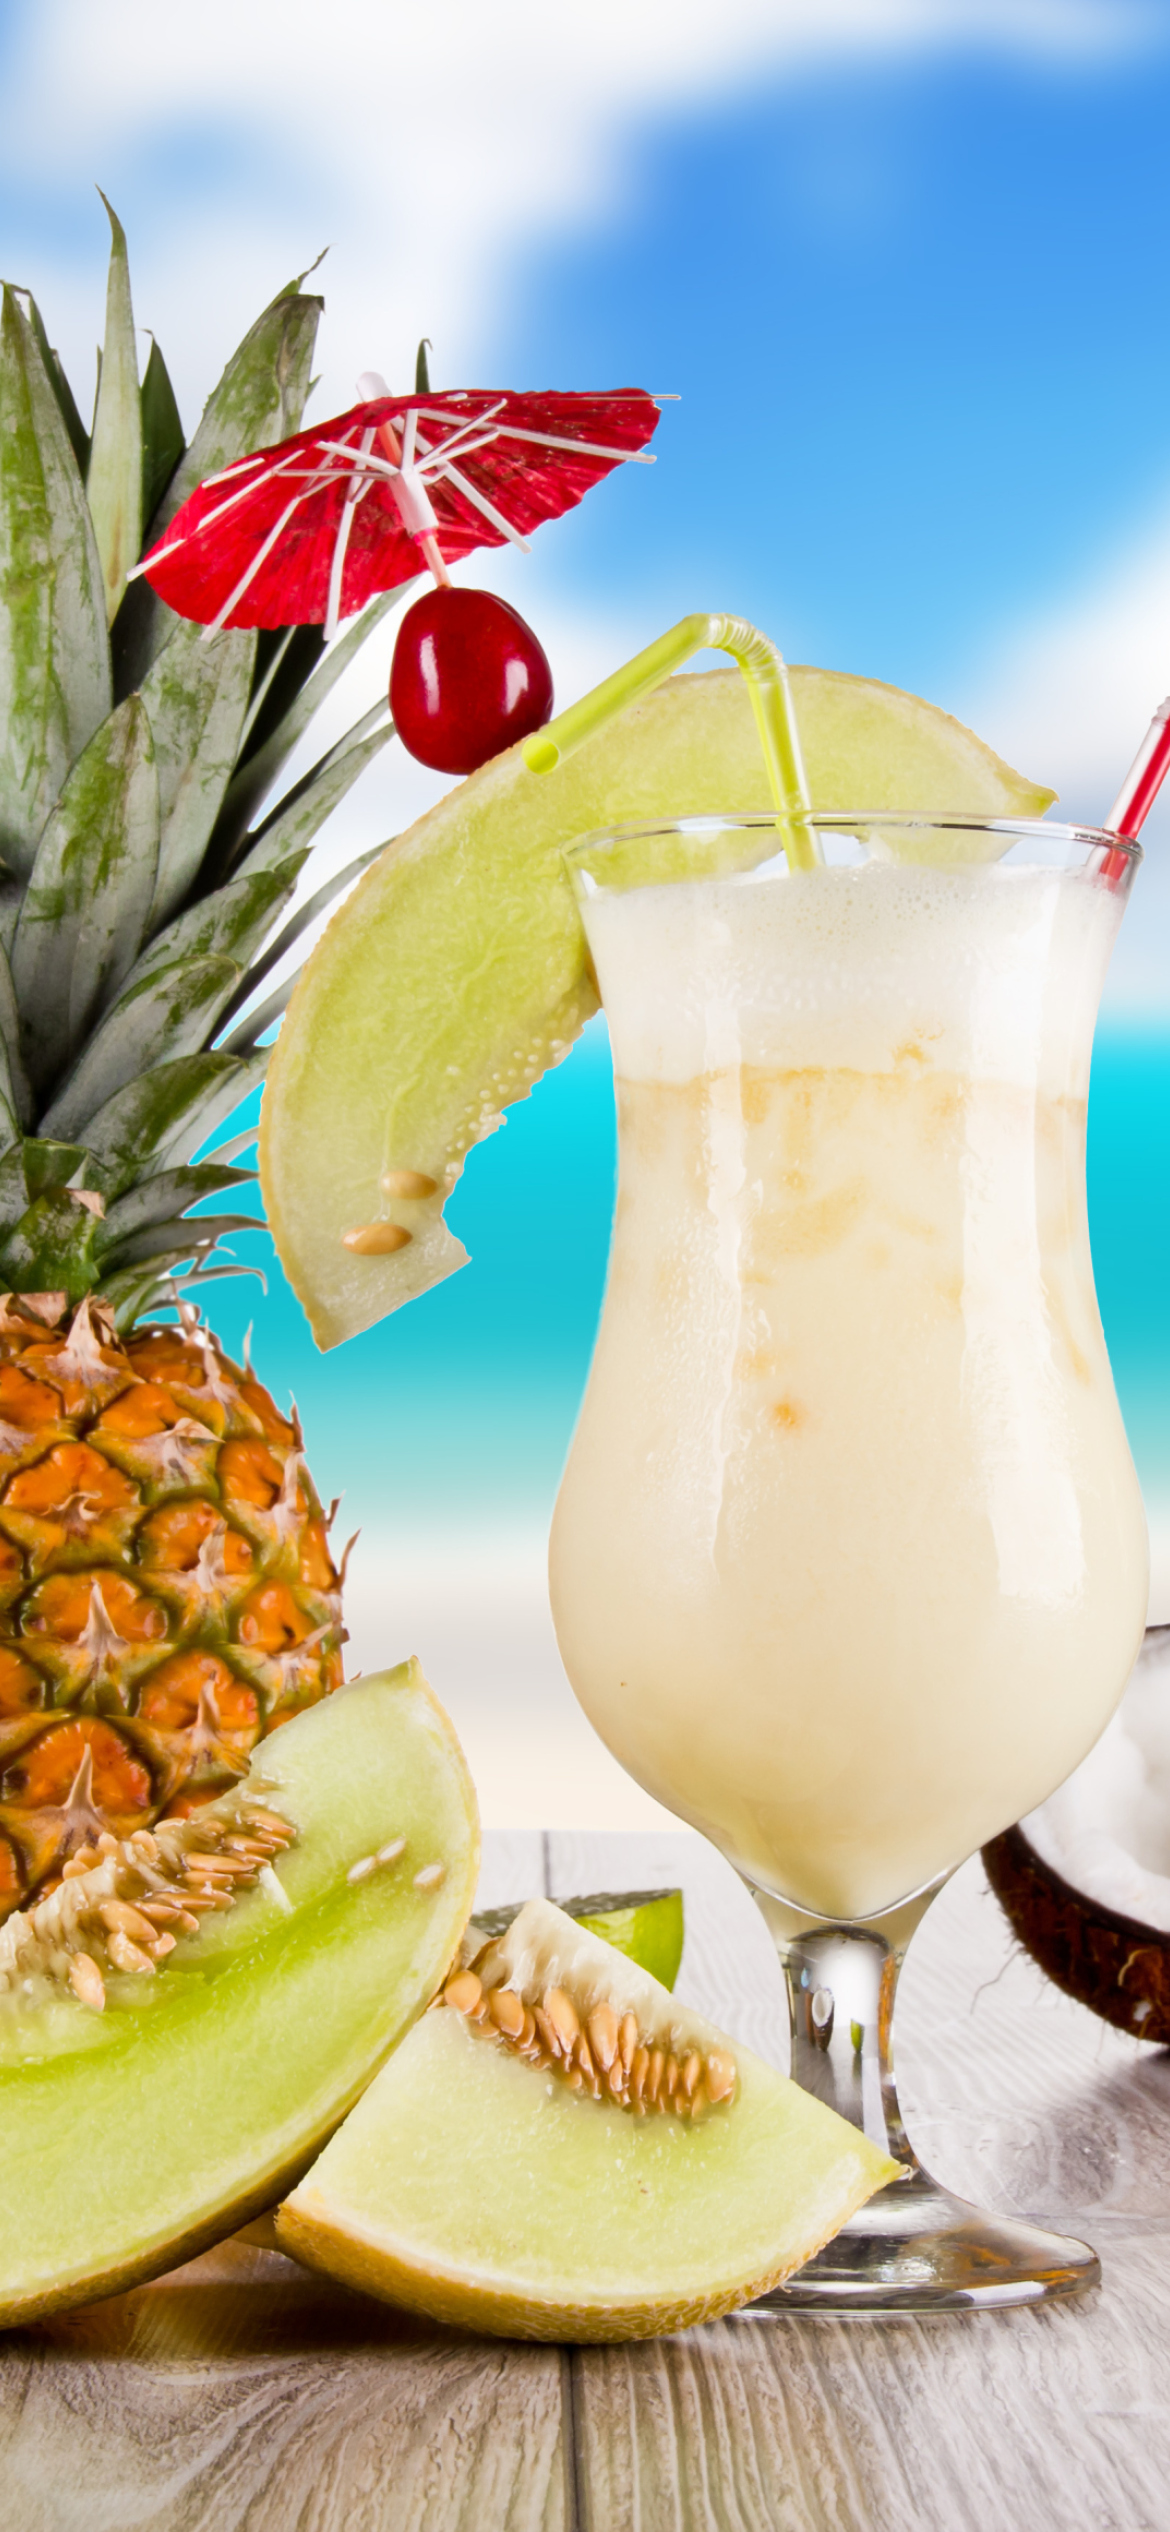 Das Coconut and Pineapple Cocktails Wallpaper 1170x2532